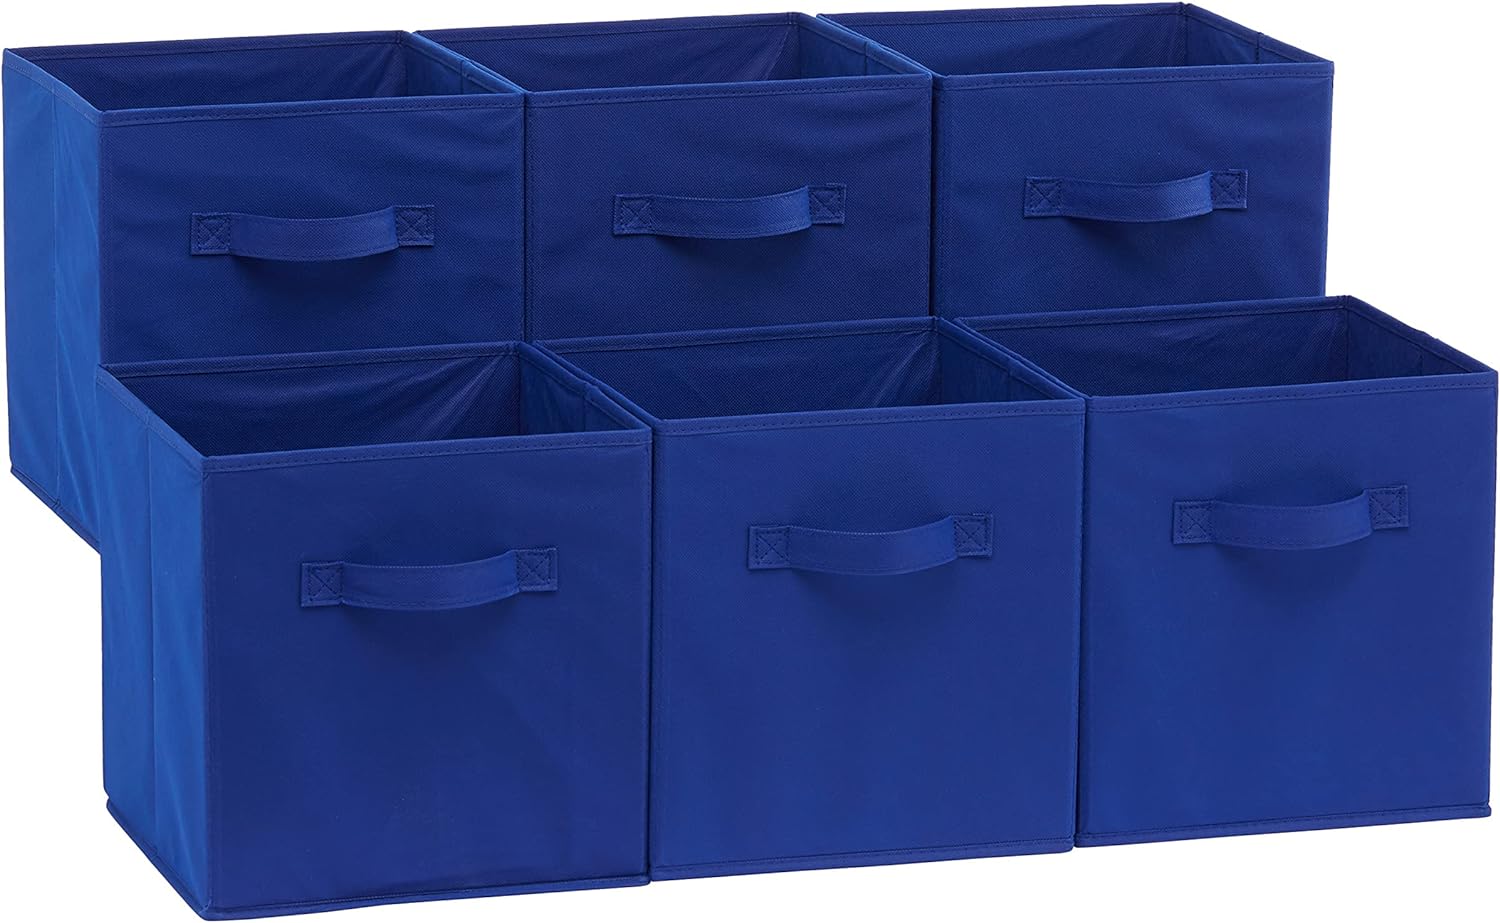 Amazon Basics Collapsible Fabric Storage Cubes Organizer with Handles, 10.5x10.5x11, Navy Blue - Pack of 6